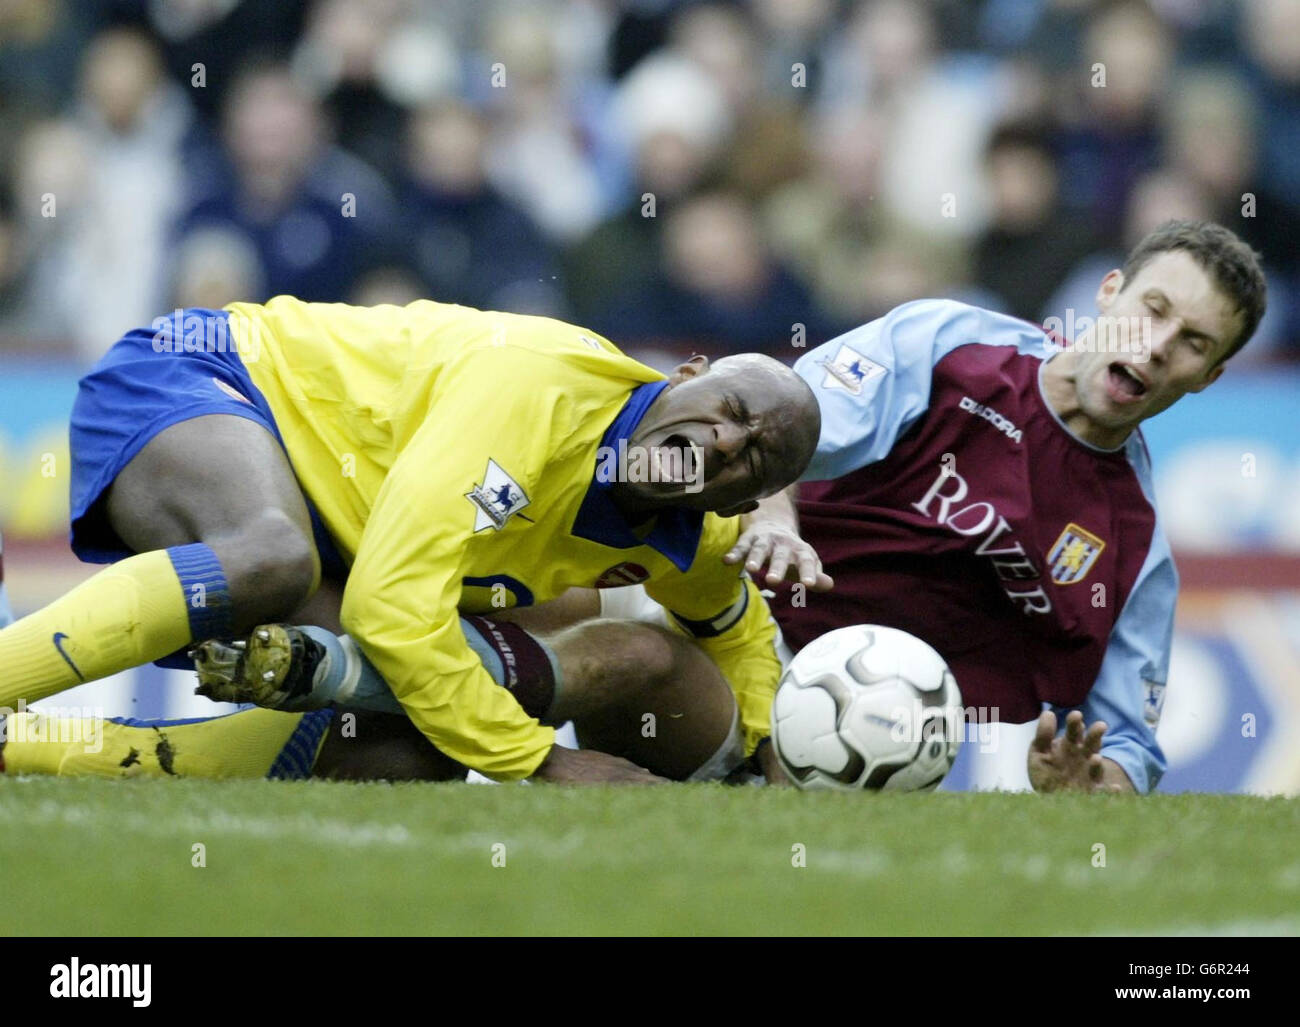 Arsenal's Patrick Vieira (left) goes down on the edge of the penalty area after a challenge from Aston Villa defender Ronnie Johnsen during the FA Barclaycard Premiership match at Villa Park, Birmingham. Stock Photo